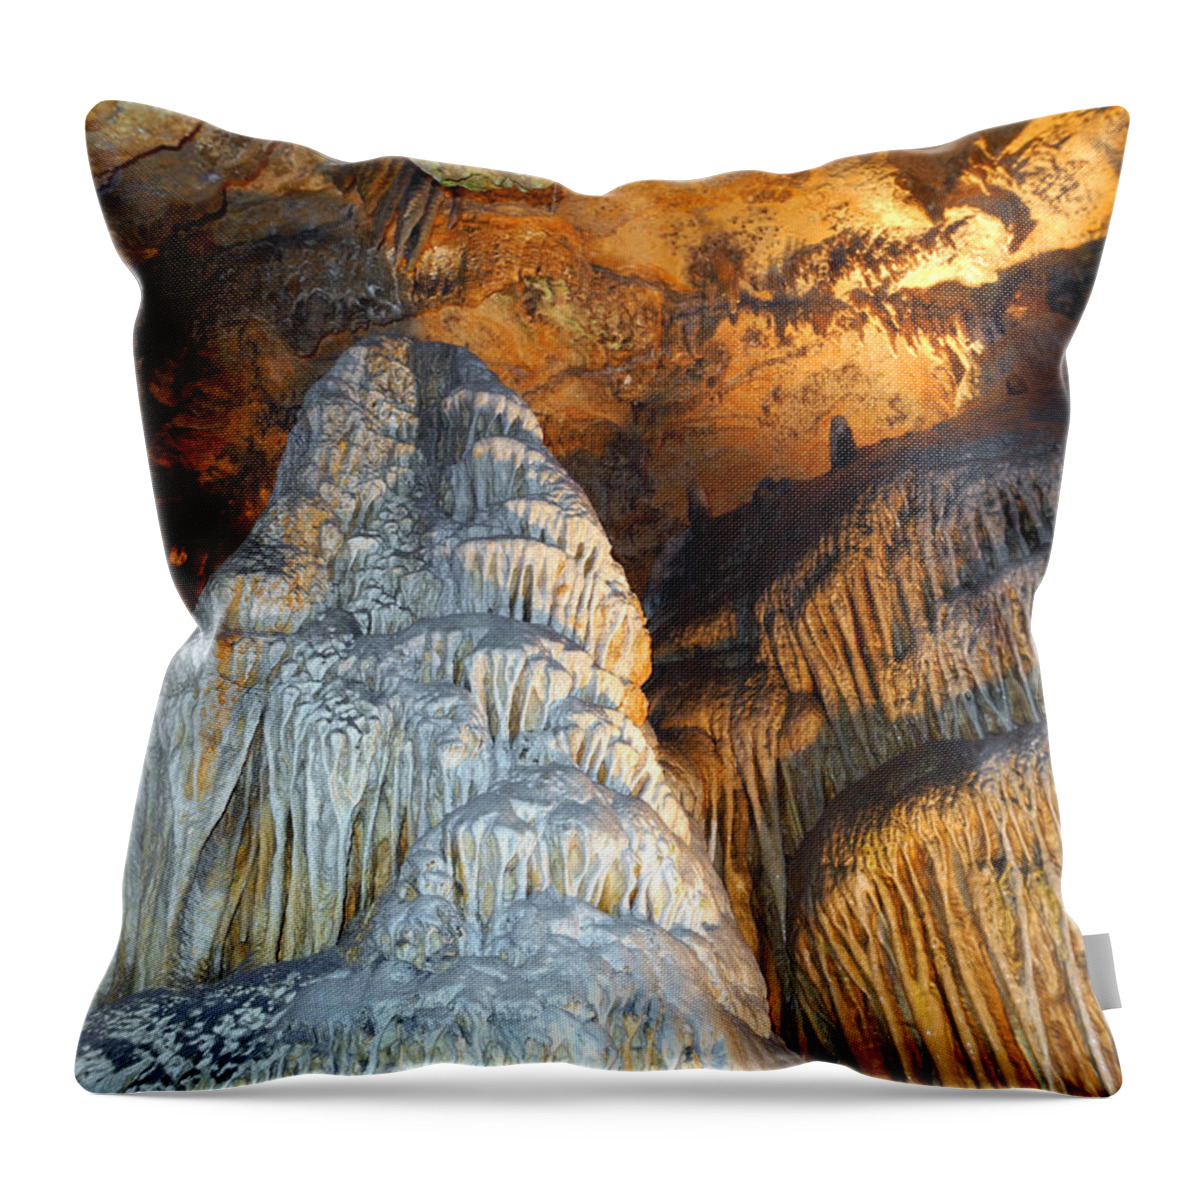 Old Throw Pillow featuring the photograph Magnificence by Lynda Lehmann